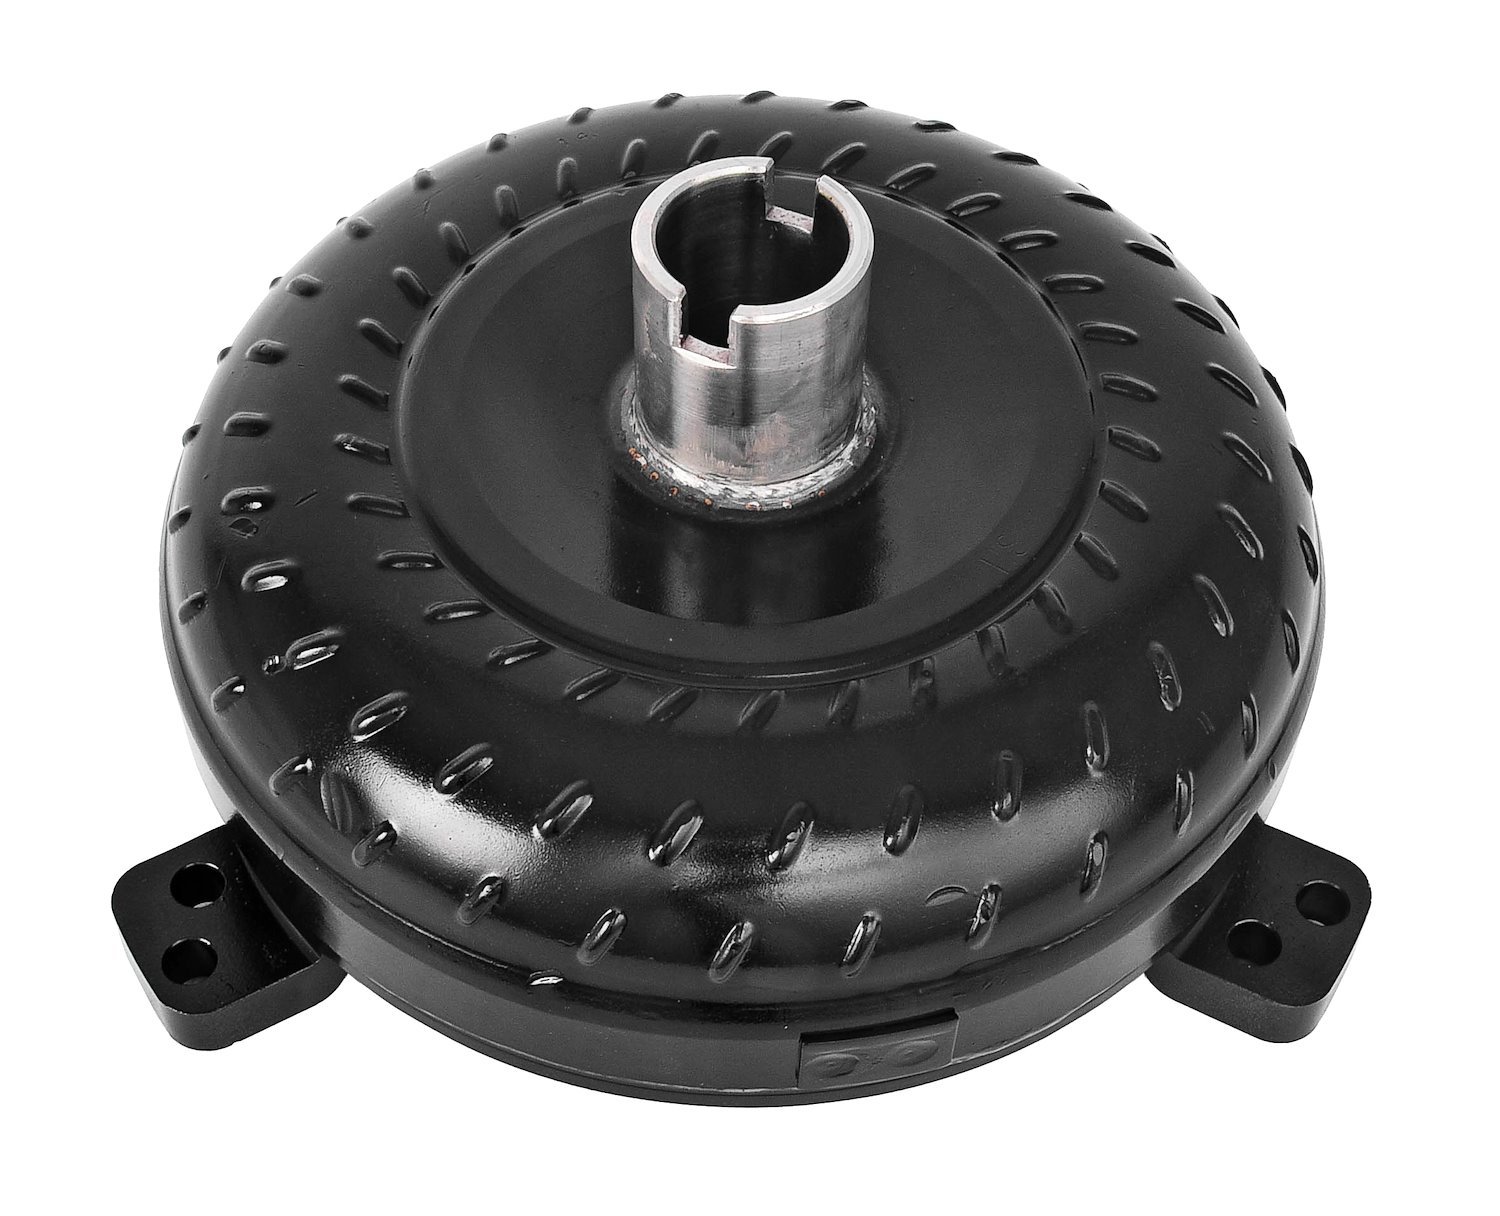 XHD Torque Converter for GM TH350/400/Powerglide [3200-3500 RPM Stall Speed]